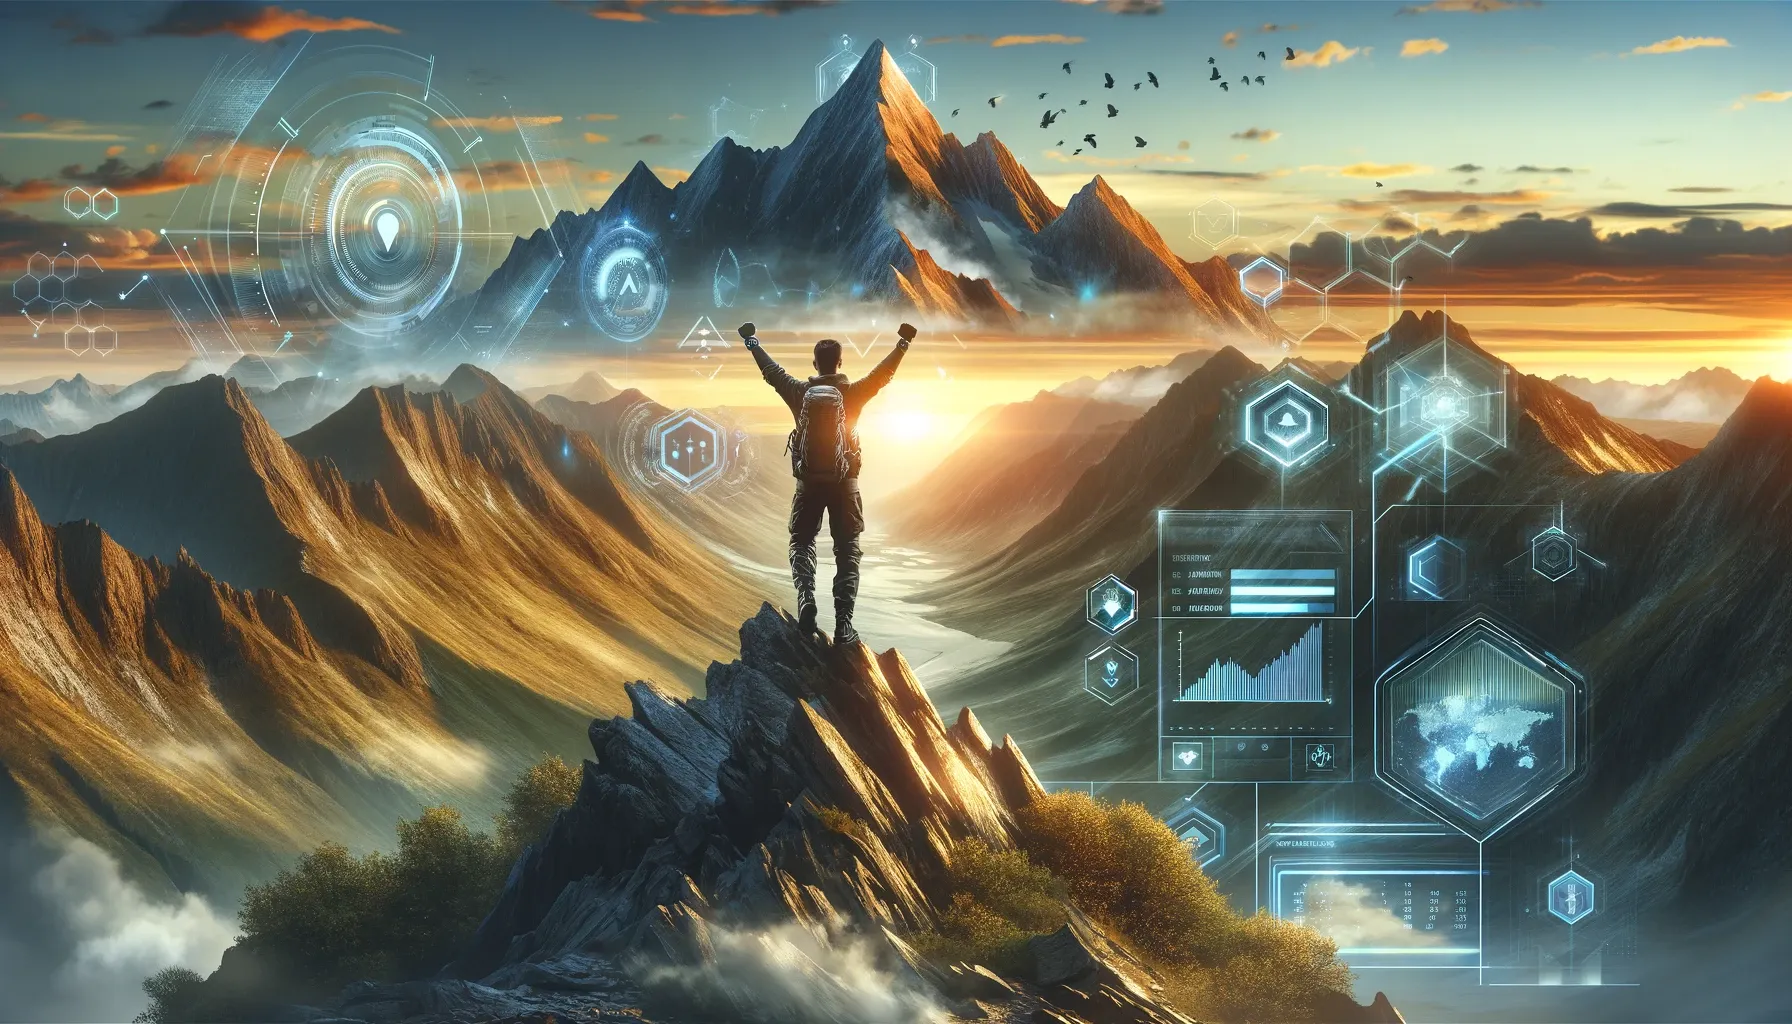 A person triumphantly stands atop a mountain peak with arms raised, wearing futuristic hiking gear. The sunrise illuminates the scene, blending with subtle holographic technology elements in the foreground.